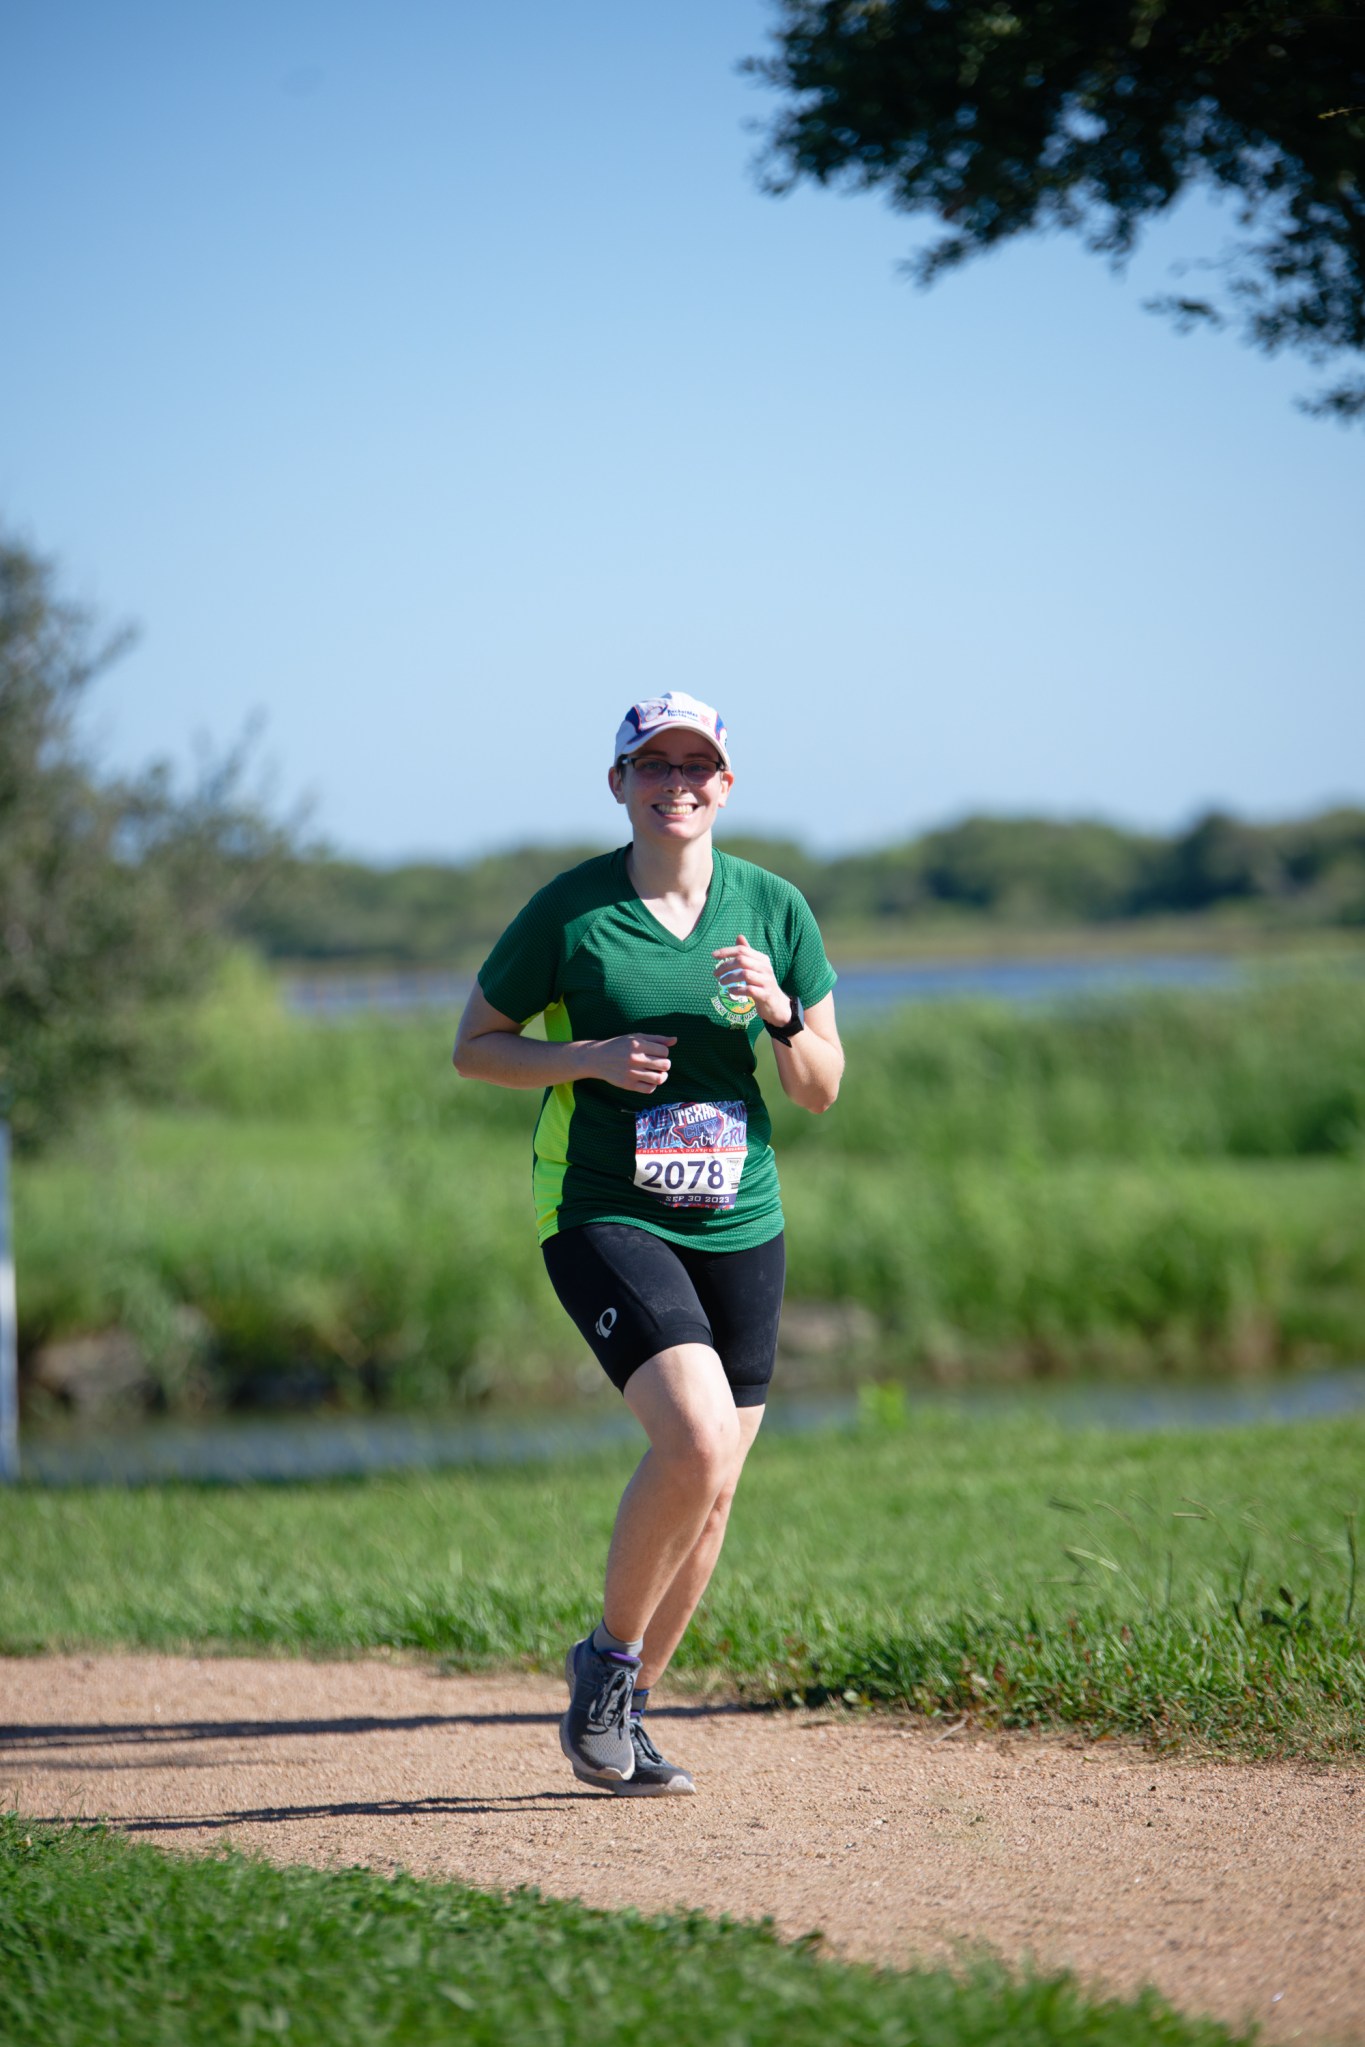 A person is running outdoors on a sunny day. They are wearing a green and black athletic outfit, consisting of a green shirt with short sleeves and black shorts. They have a race bib number 2078 attached to their shirt and are wearing a white cap and glasses.